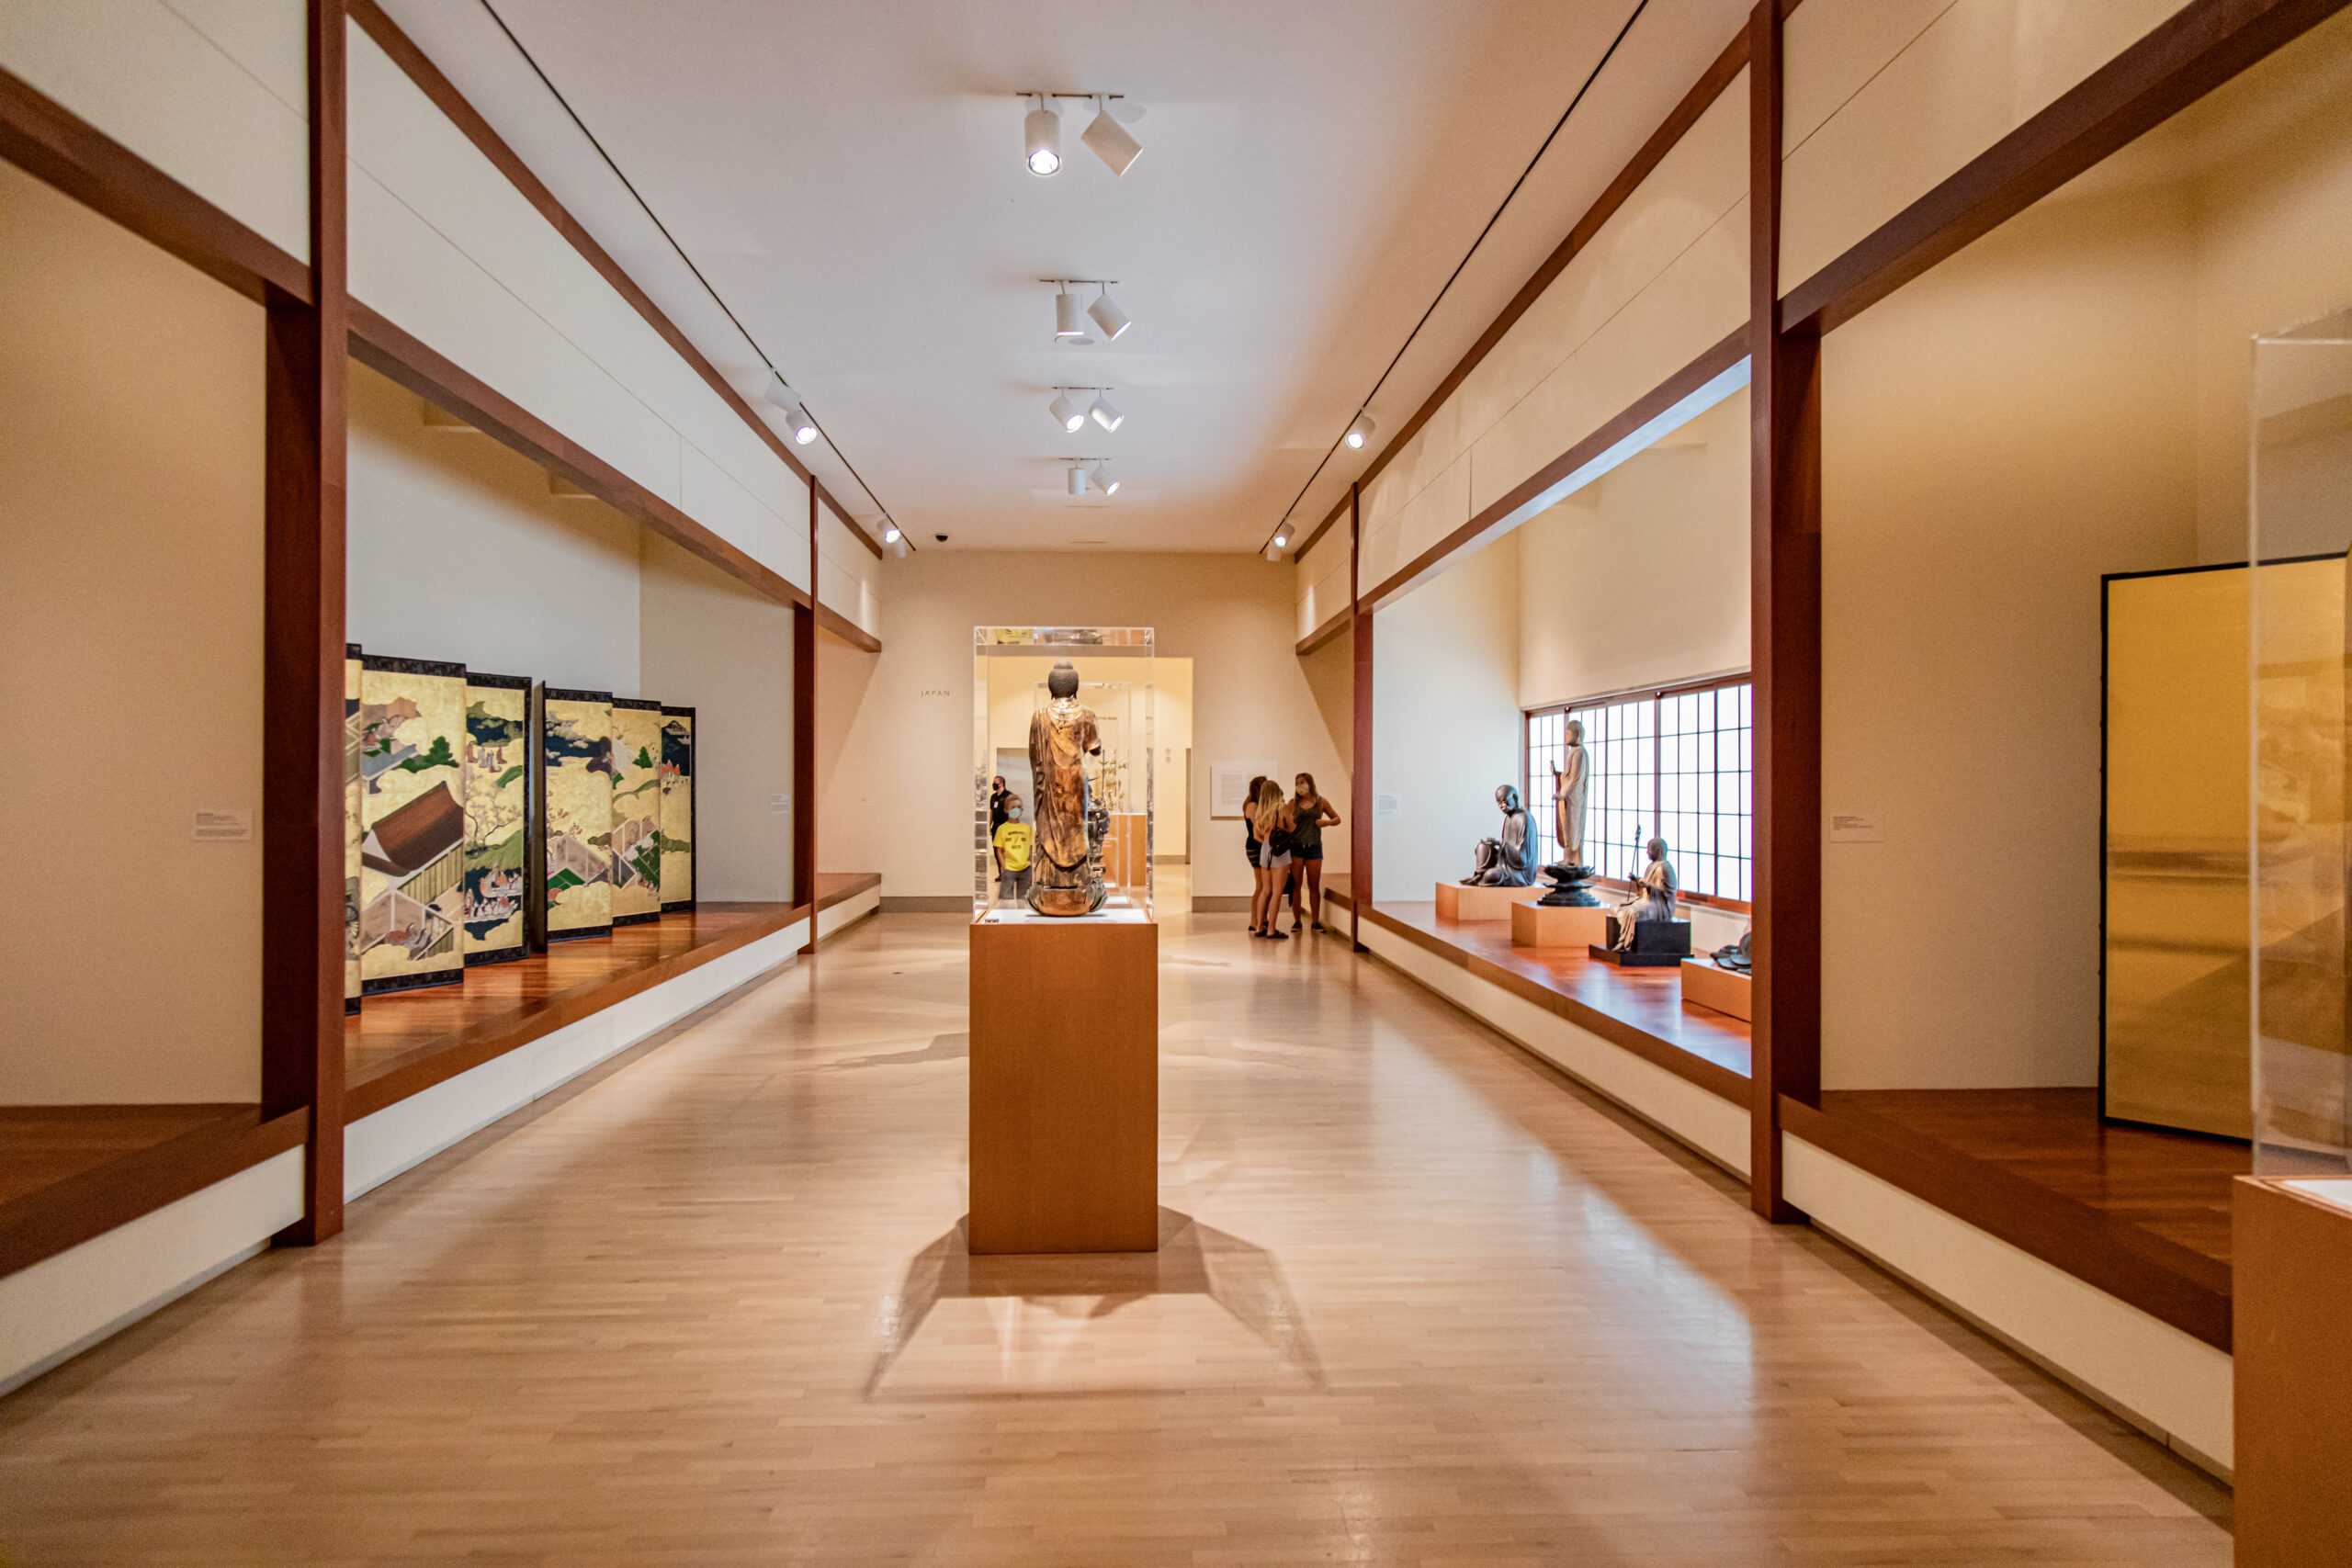 Dallas Museum of Art: A First Timer's Guide